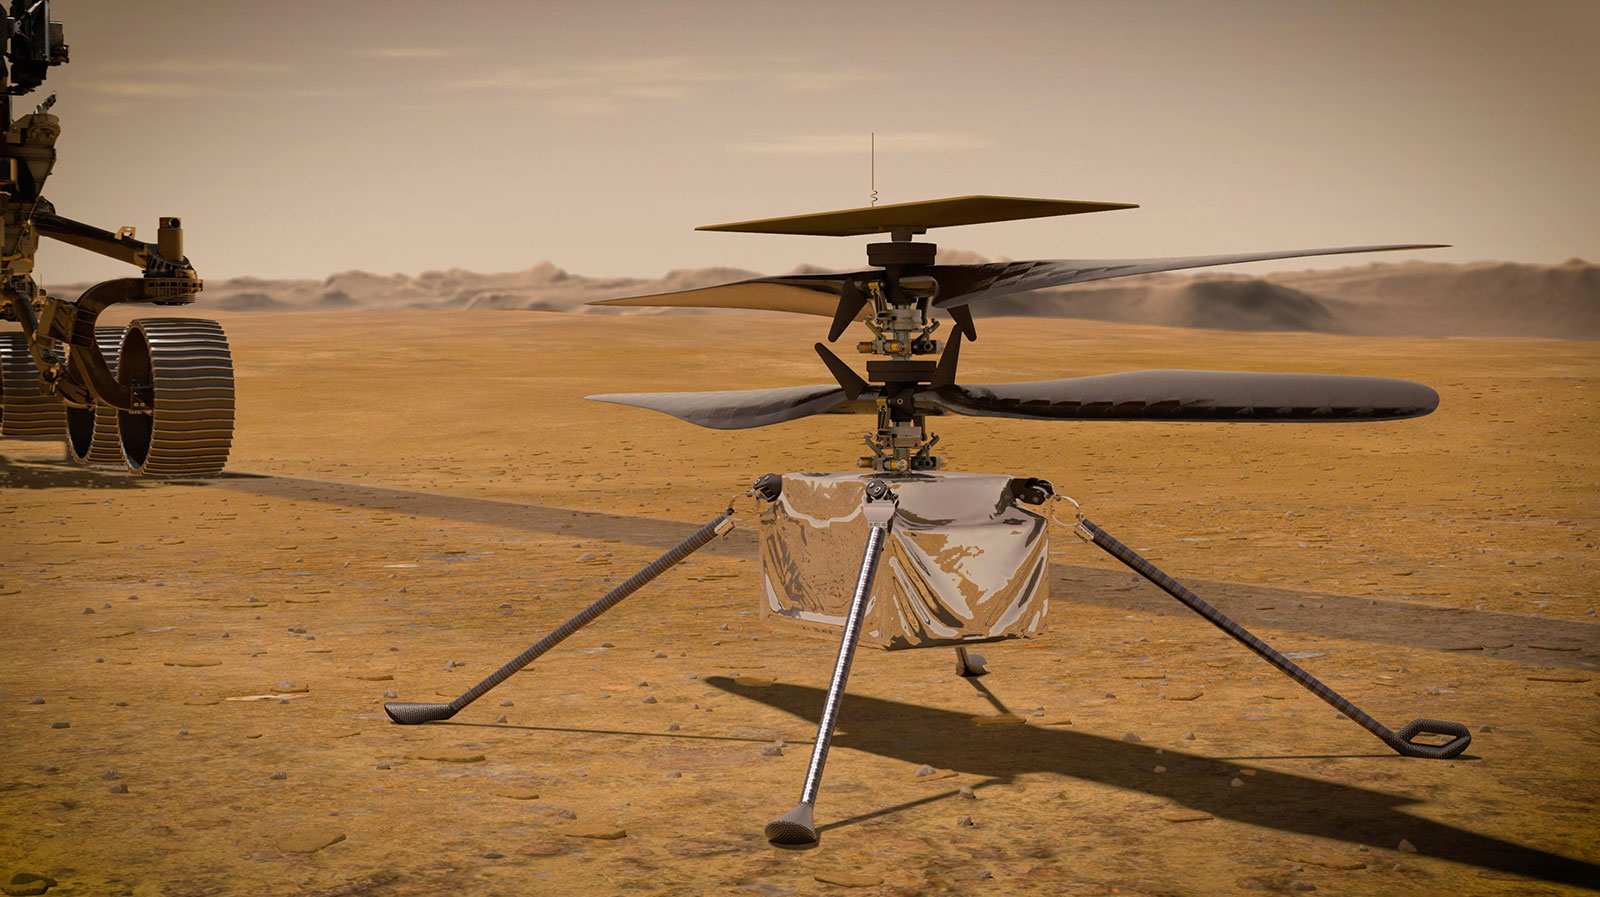 Drone on Mars could be used for solar panel cleaning